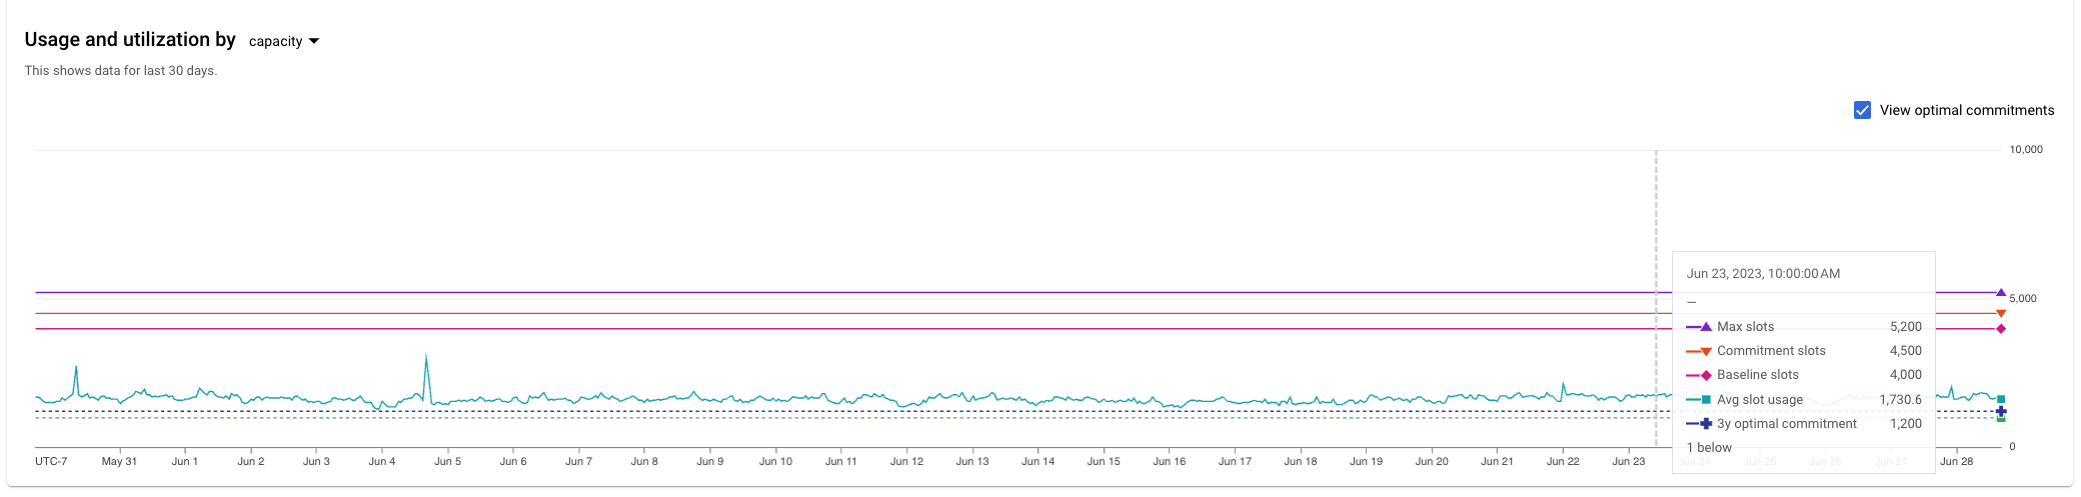 Slot usage chart in the
Google Cloud console.